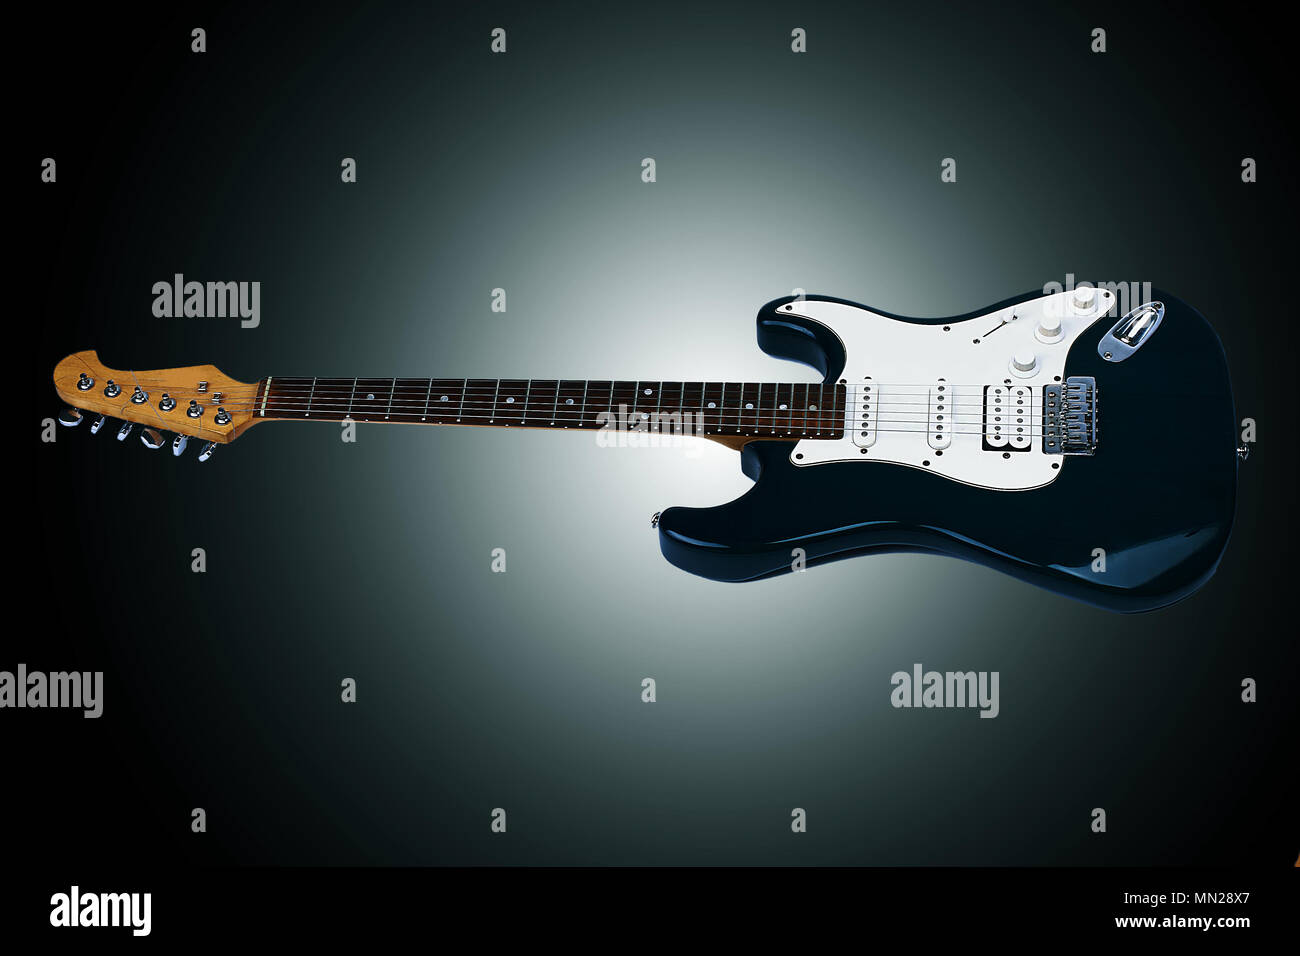 Beautiful guitar. Isolated on a black background with vignette Stock Photo